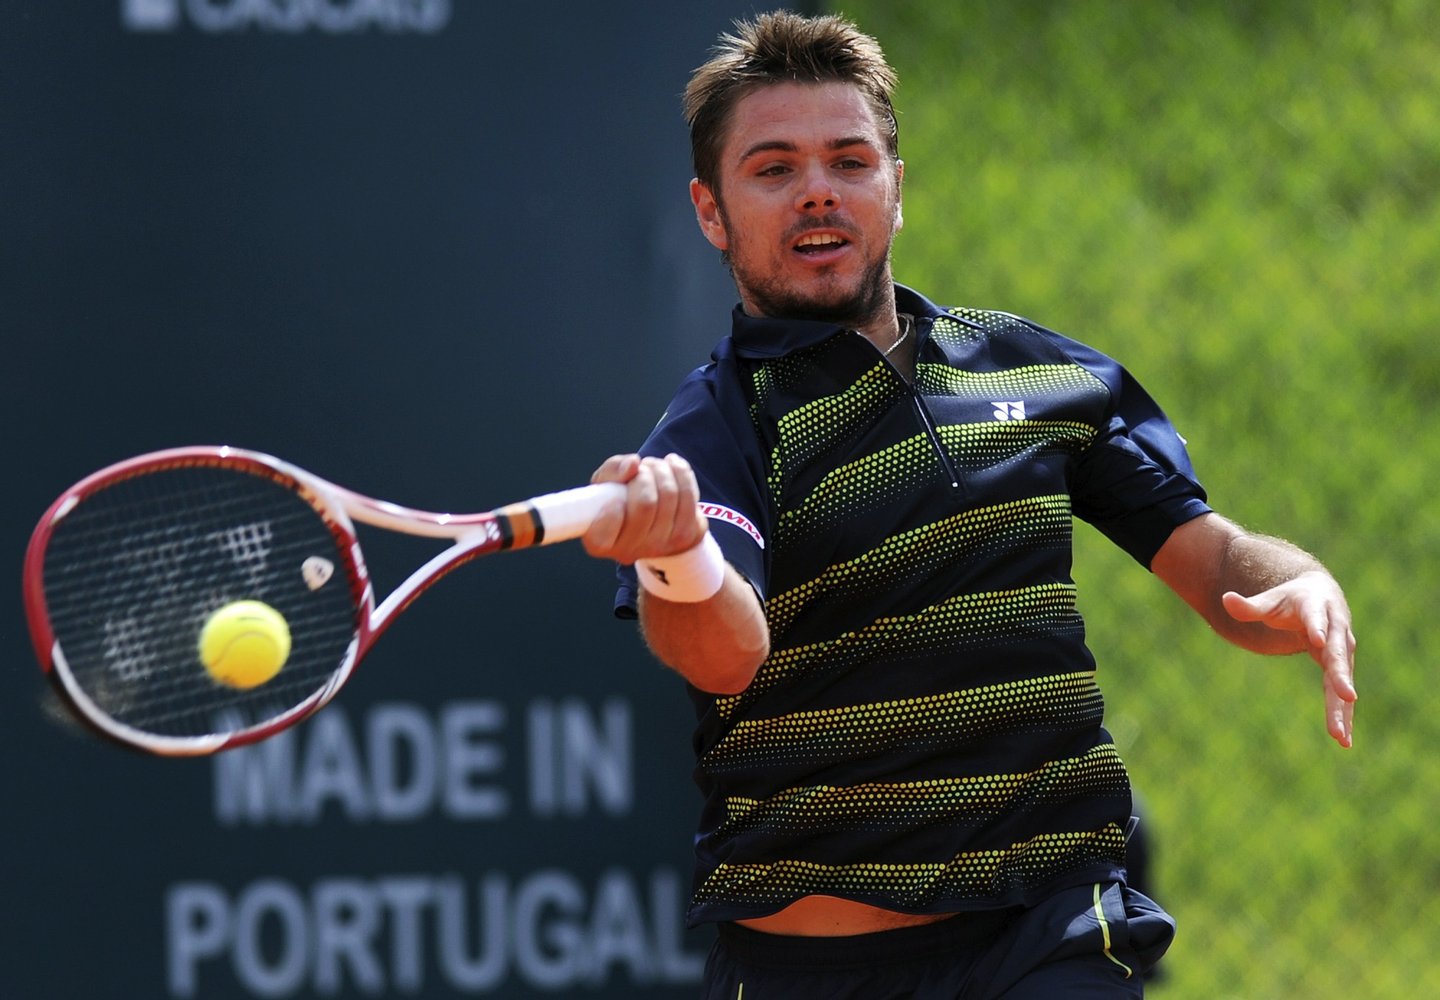 Switzerland's Stanislas Wawrinka returns the ball to Netherlands' Robin Haase during their Estoril Open tennis tournament quarter-final match in Oeiras, on the outskirts of Lisbon, on May 4, 2012. Wawrinka won 6-1, 6-4. AFP PHOTO / FRANCISCO LEONG (Photo credit should read FRANCISCO LEONG/AFP/GettyImages)